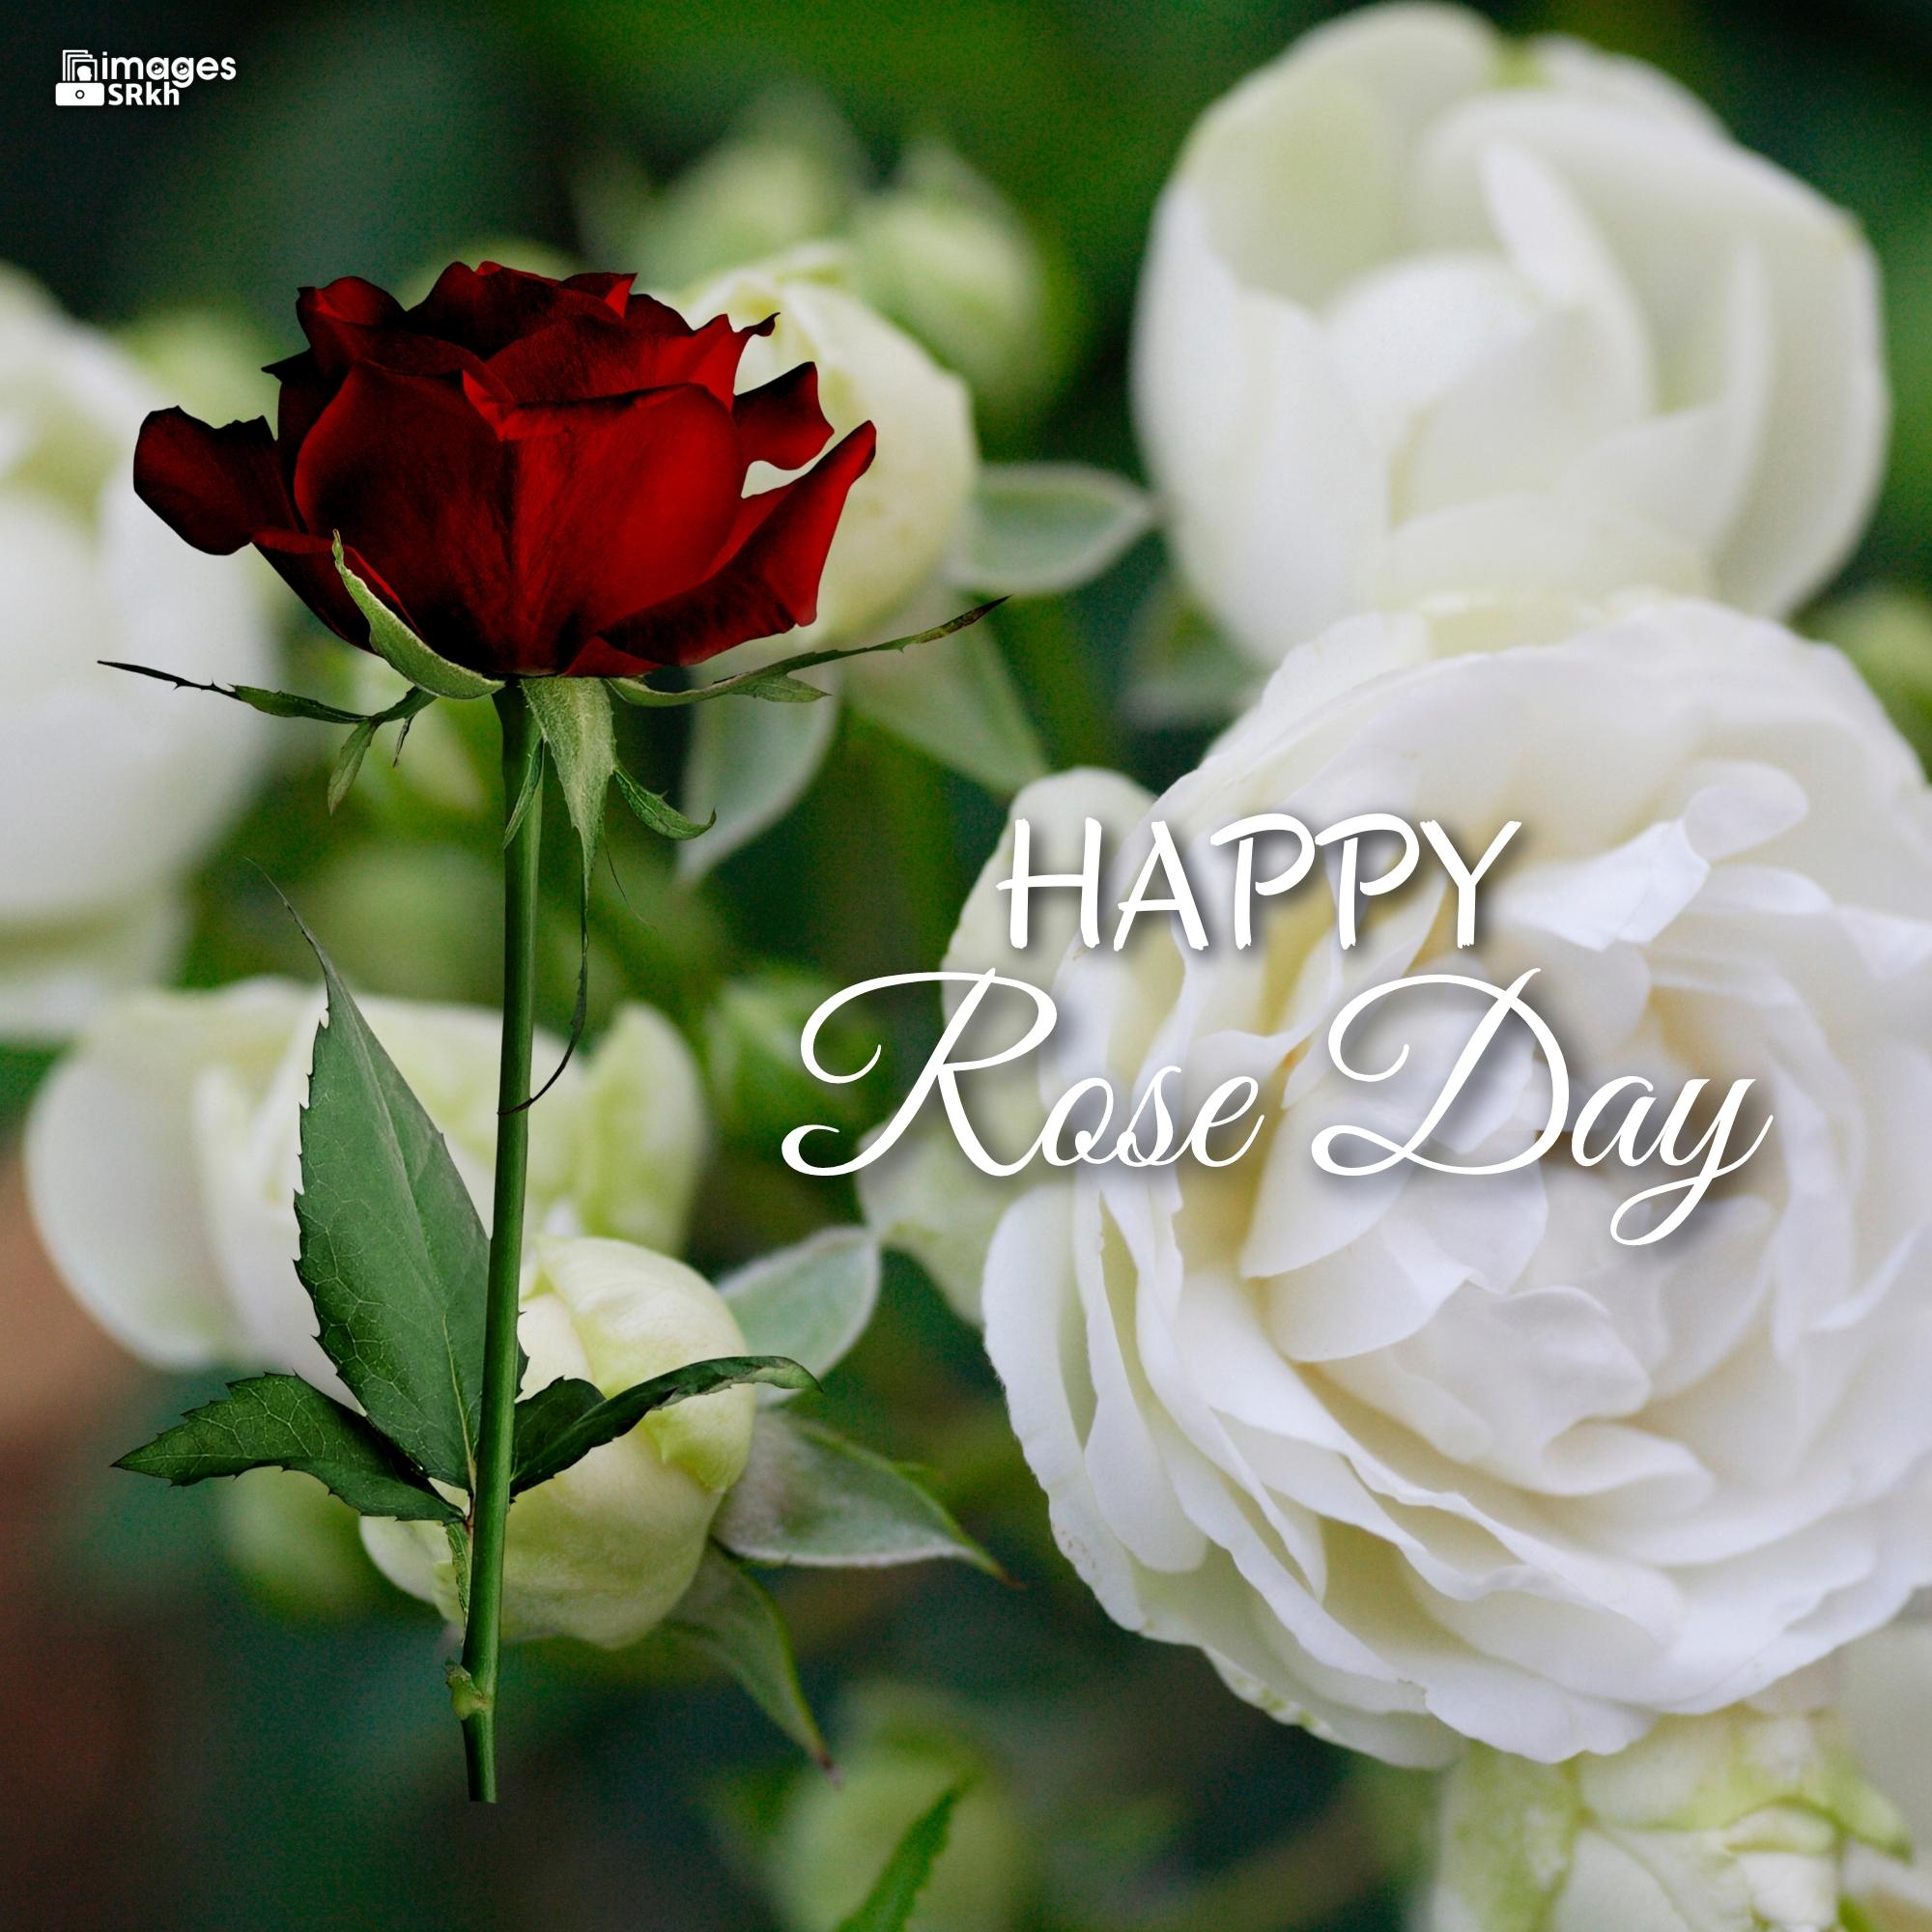 Happy Rose Day Image Hd Download (3)